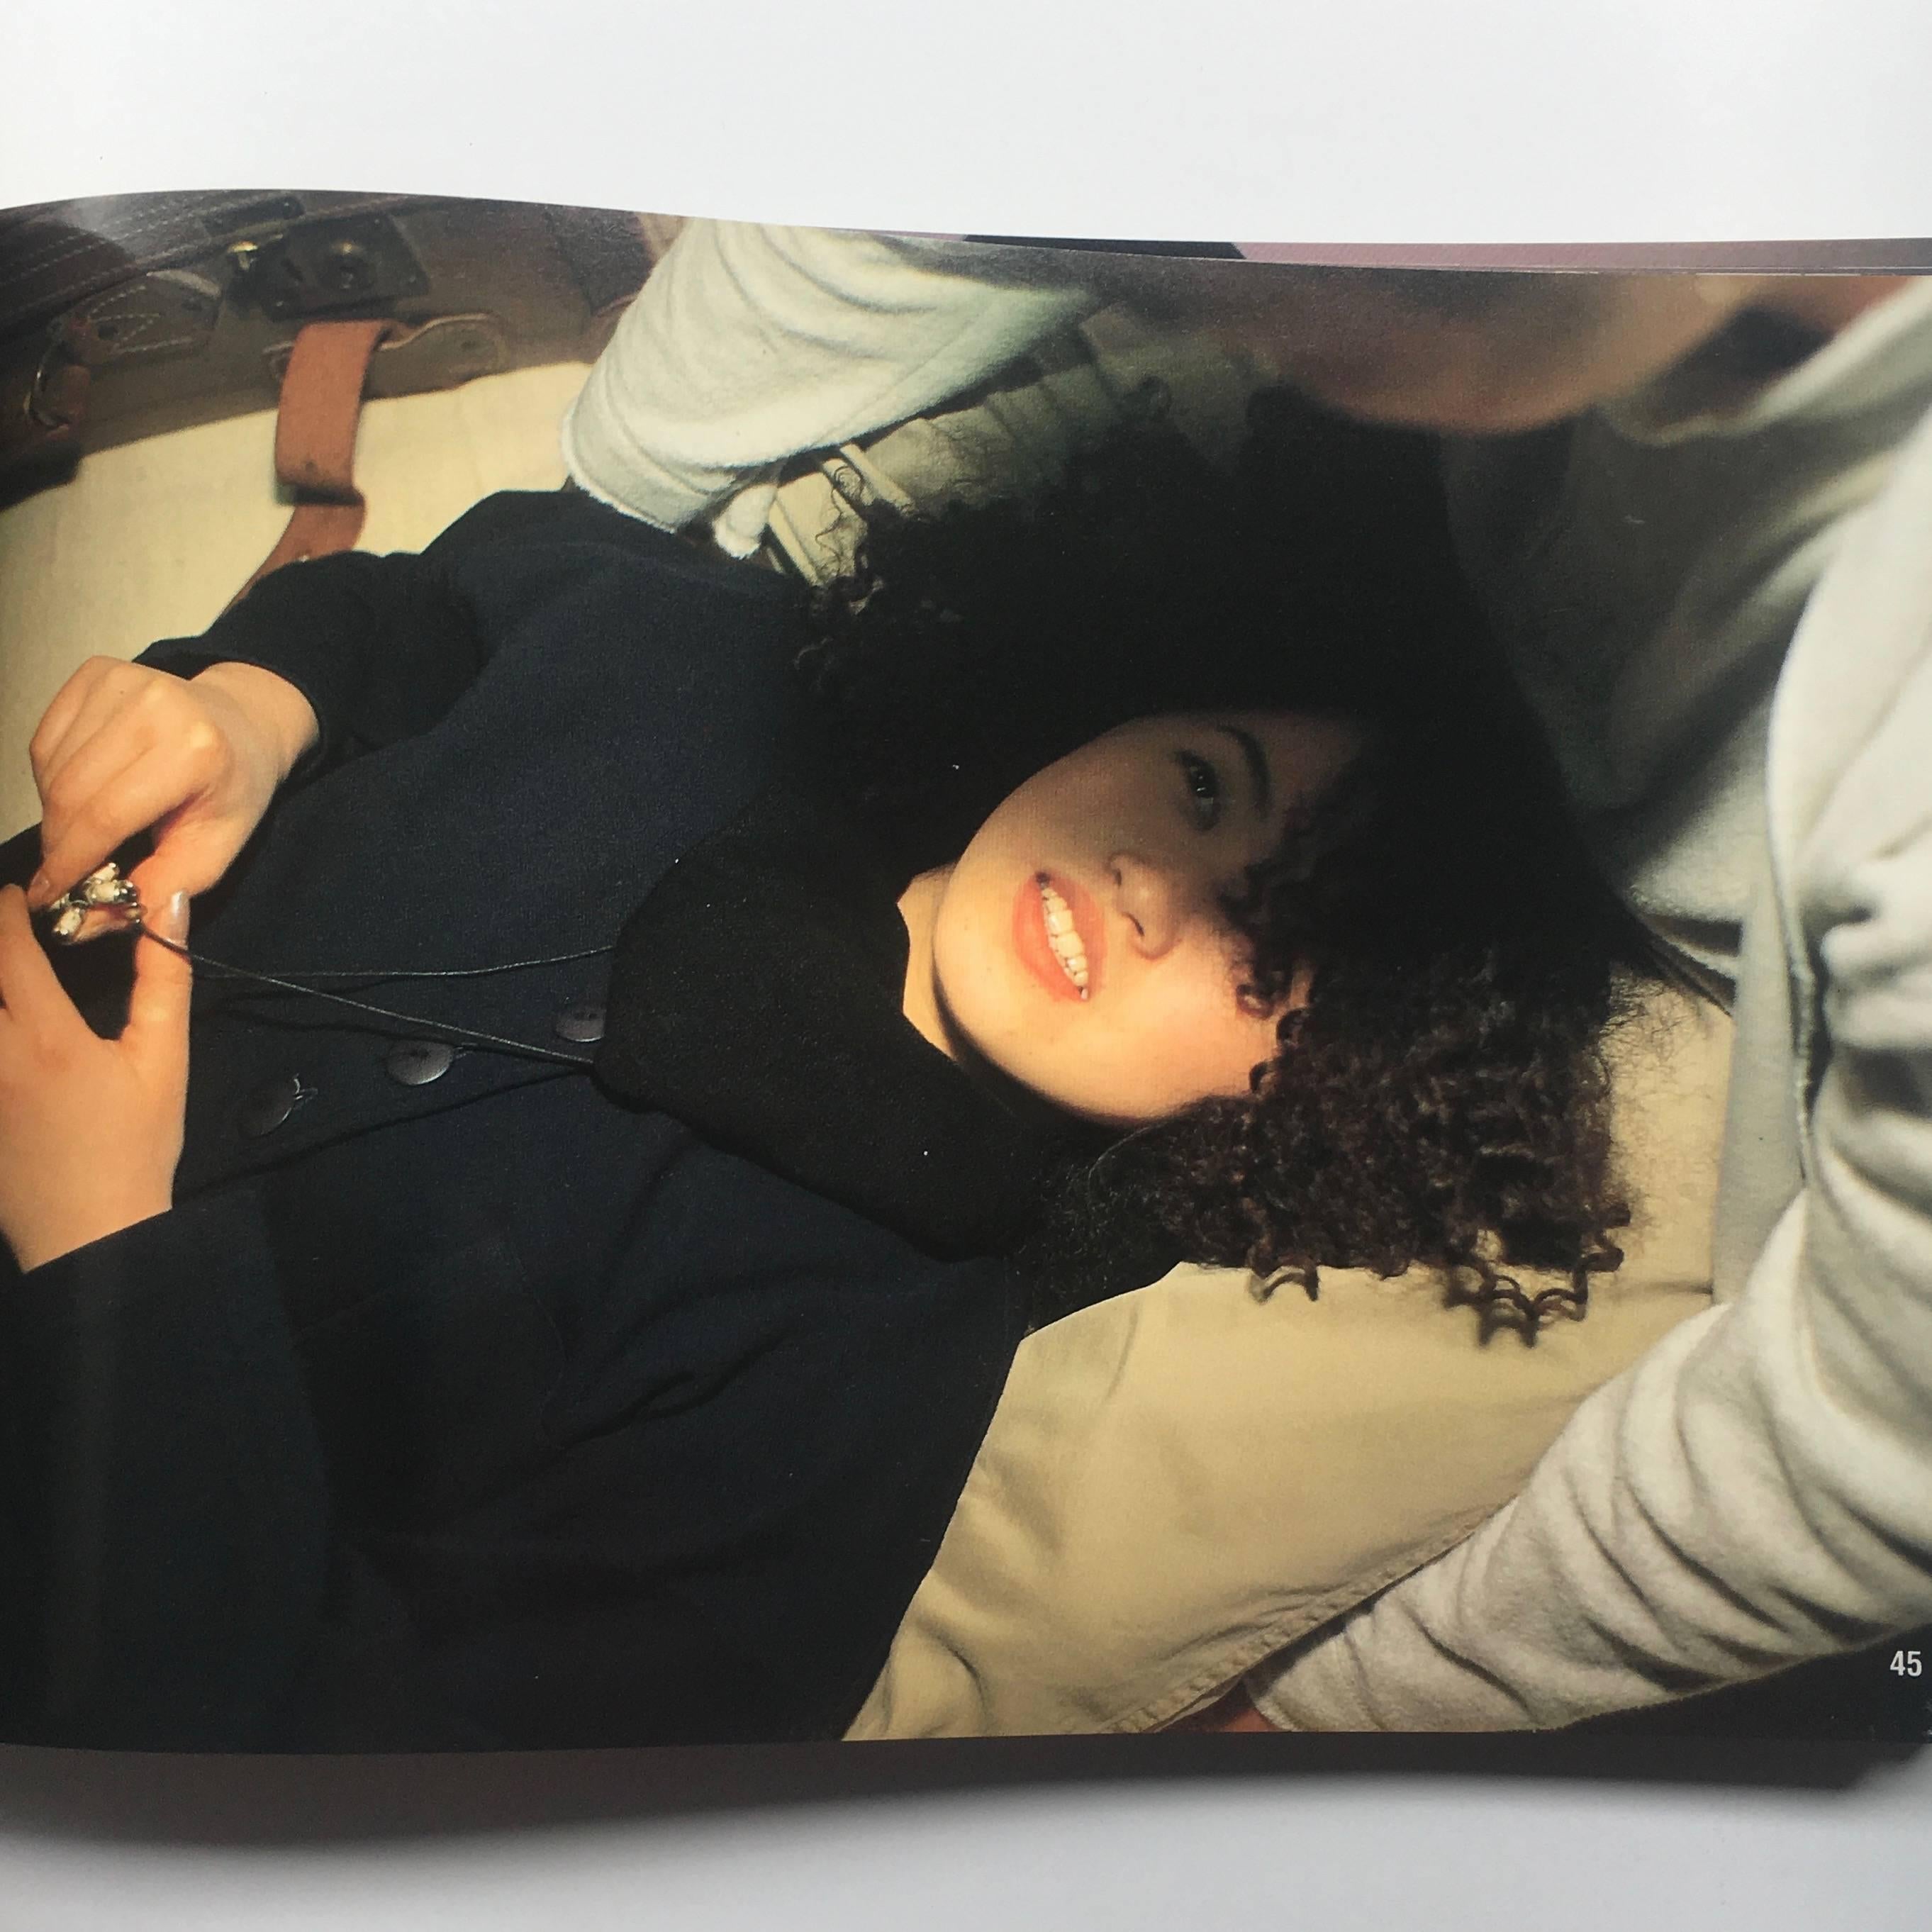 First edition, published by Ohta Publishing Company, 1994.

Artists Araki and Goldin, come together to collaborate upon a project concerning the youth of Tokyo, with all its joys, thrills and anxieties. Described by critics as, ‘a jewel of visual